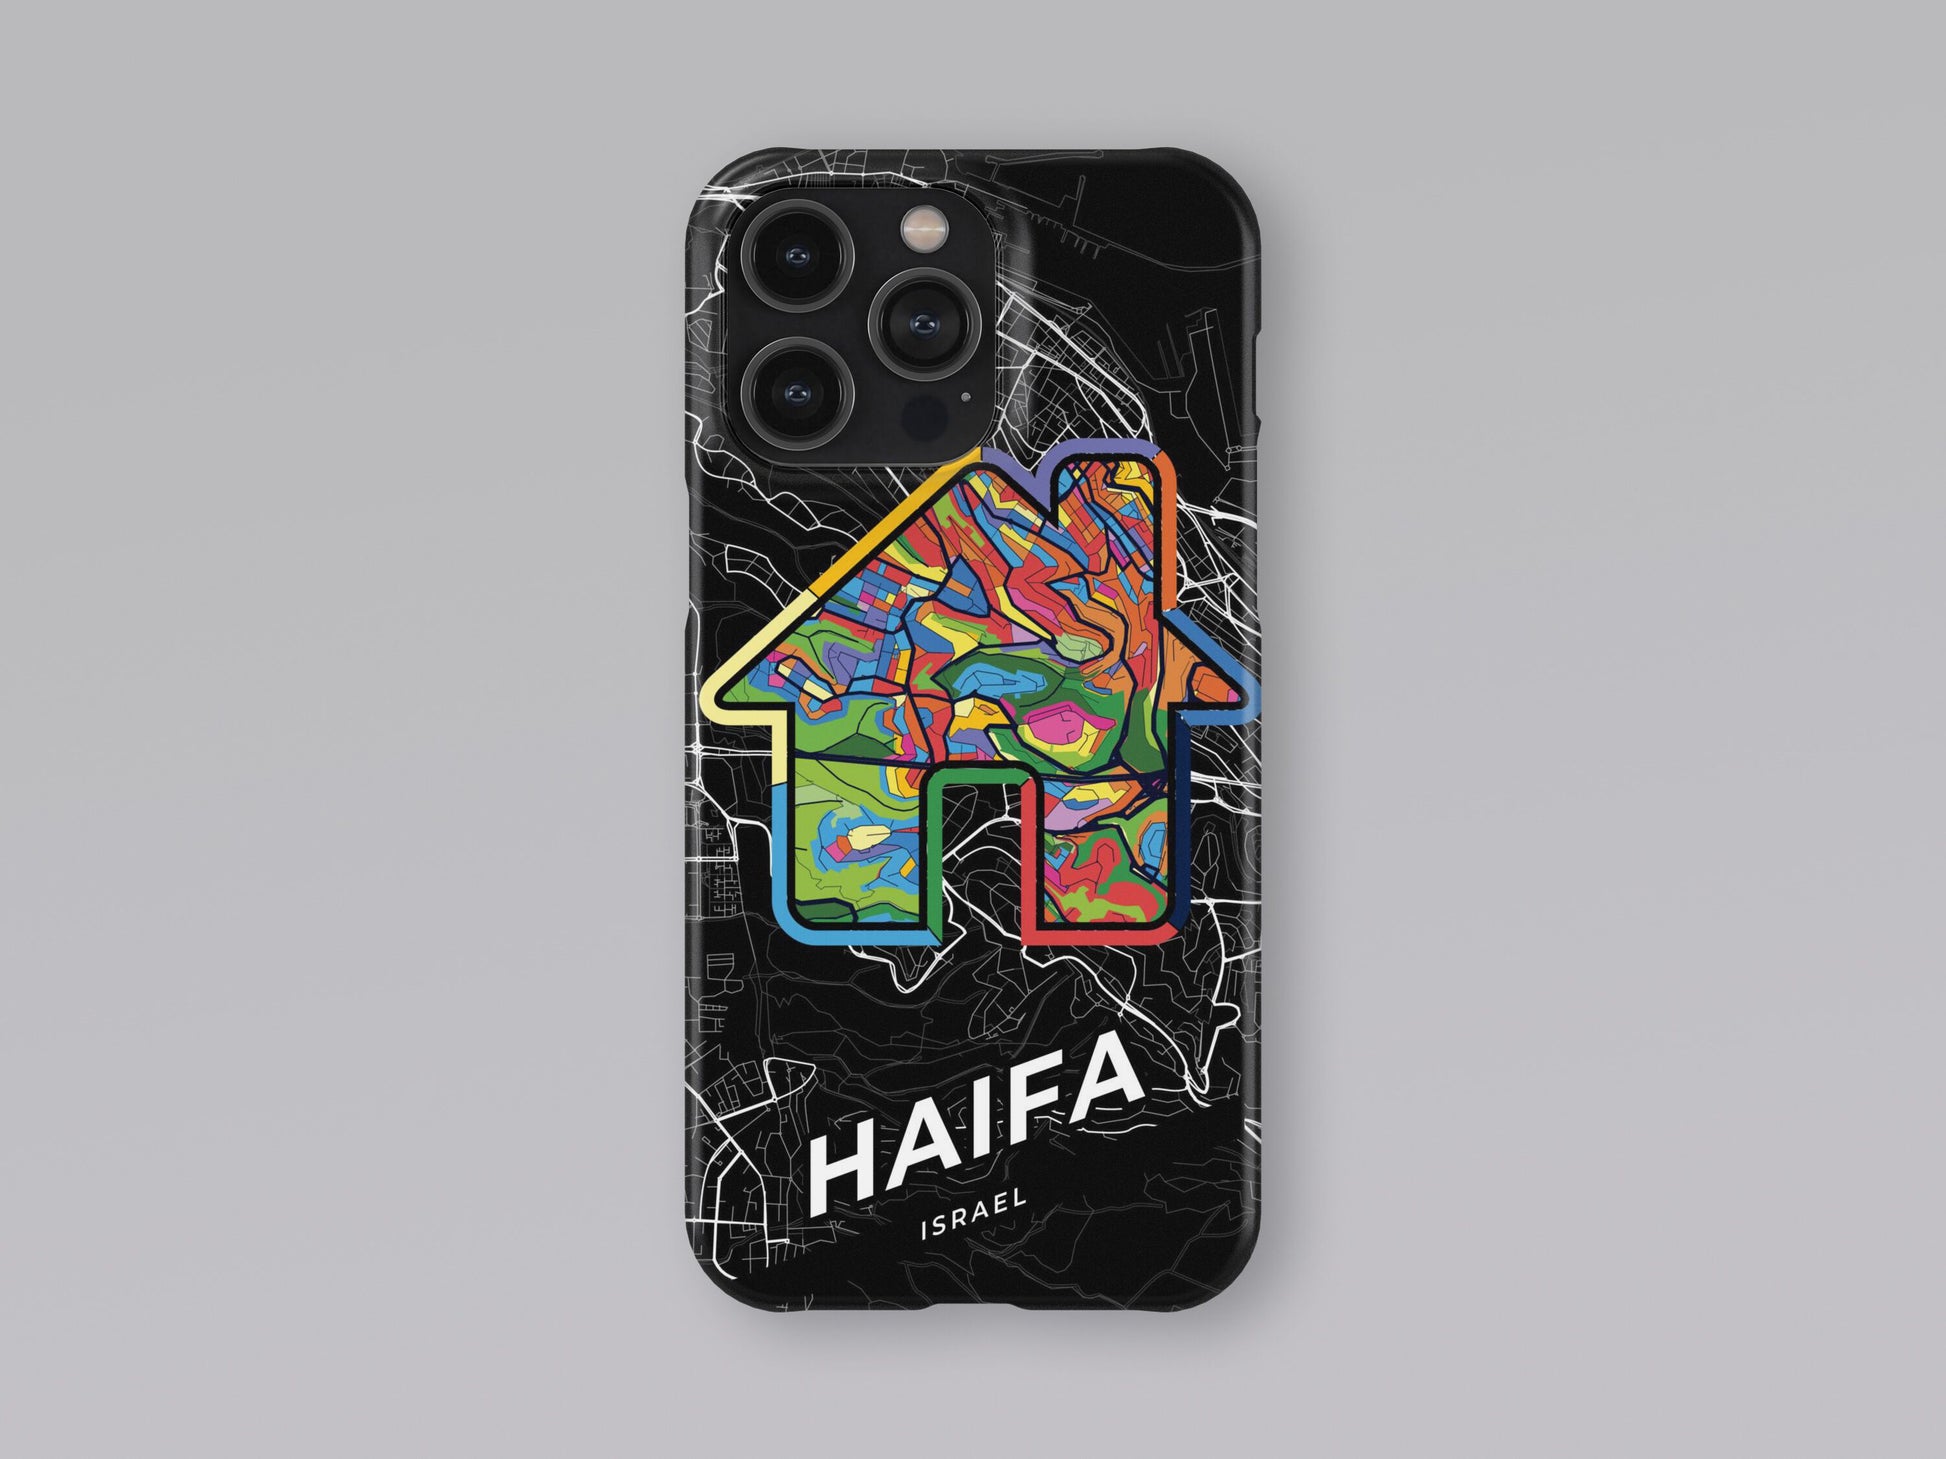 Haifa Israel slim phone case with colorful icon. Birthday, wedding or housewarming gift. Couple match cases. 3